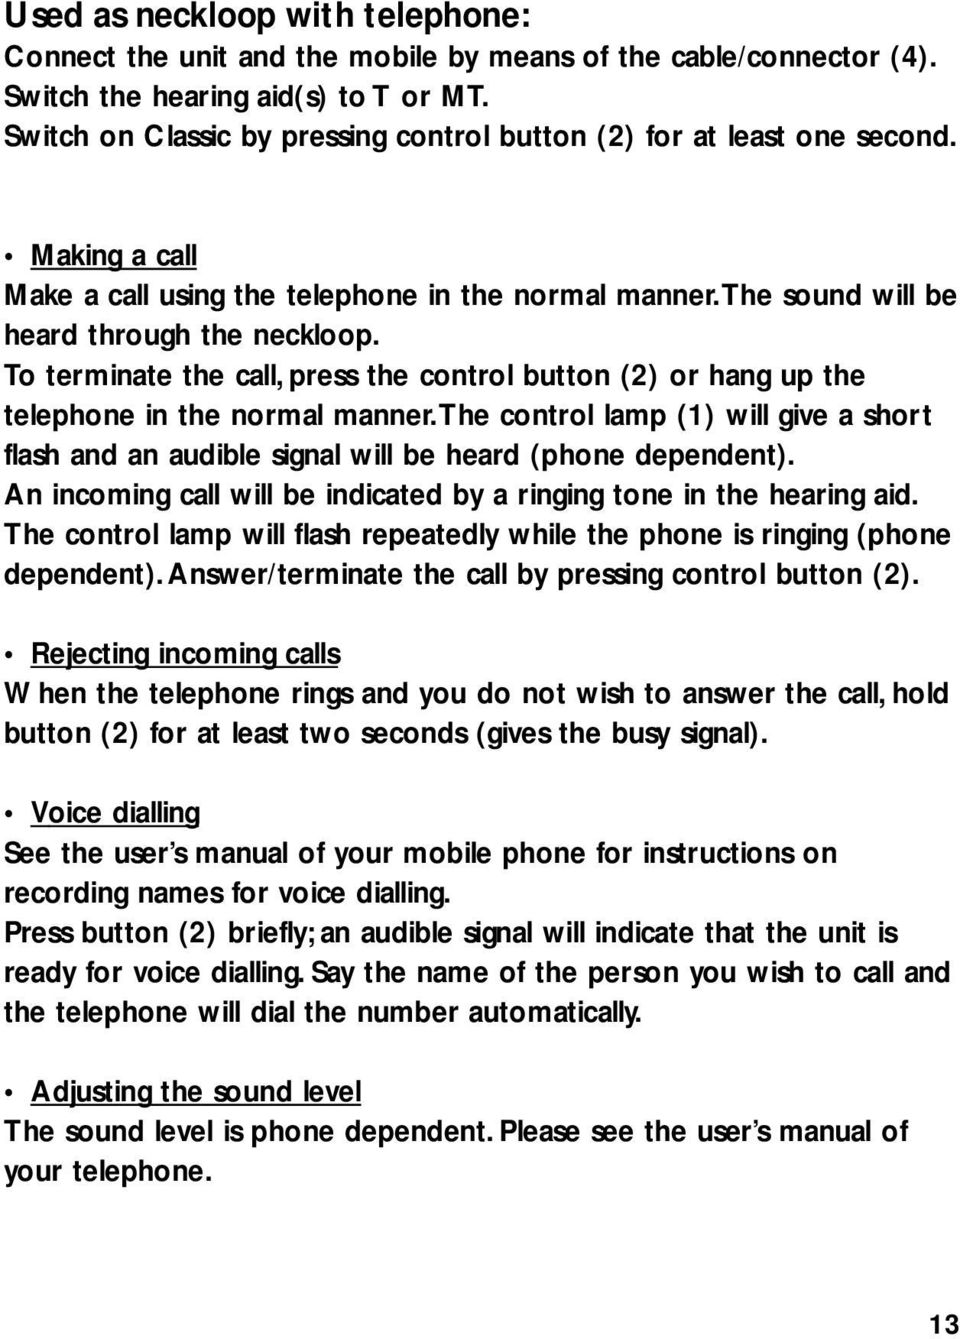 To terminate the call, press the control button (2) or hang up the telephone in the normal manner.the control lamp (1) will give a short flash and an audible signal will be heard (phone dependent).